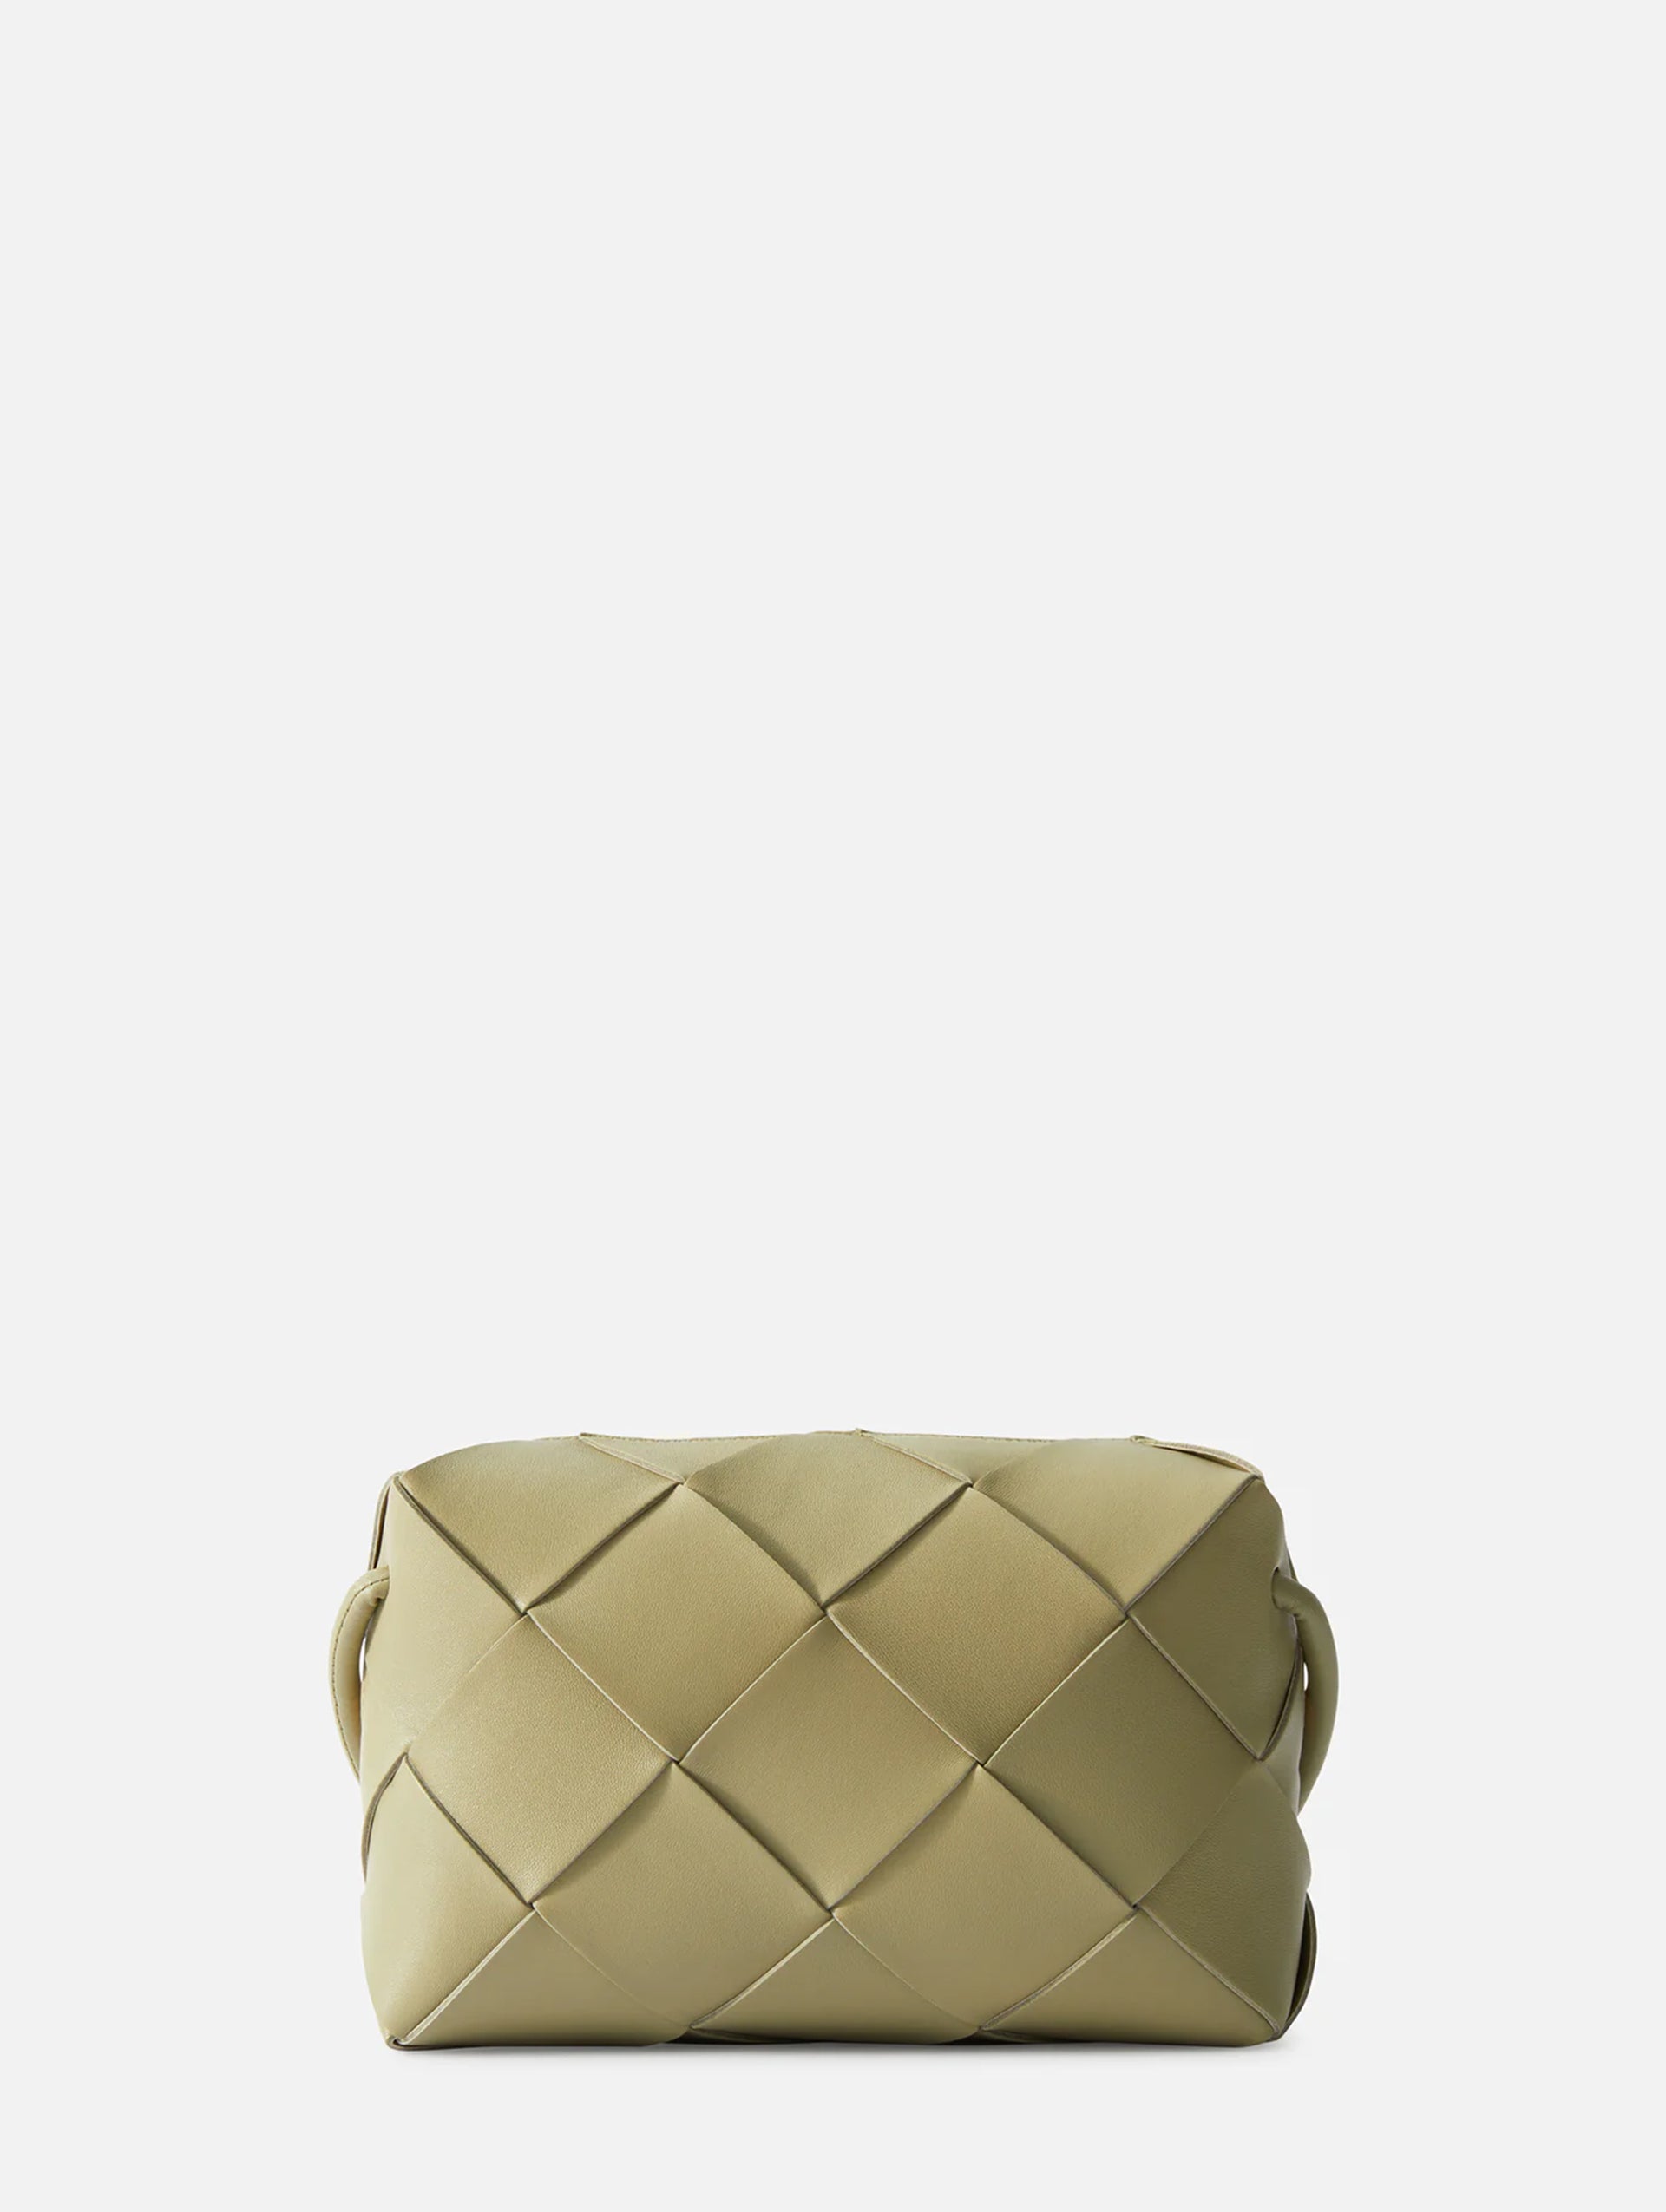 Everything You Need To Know About Bottega Veneta's Pouch Bag